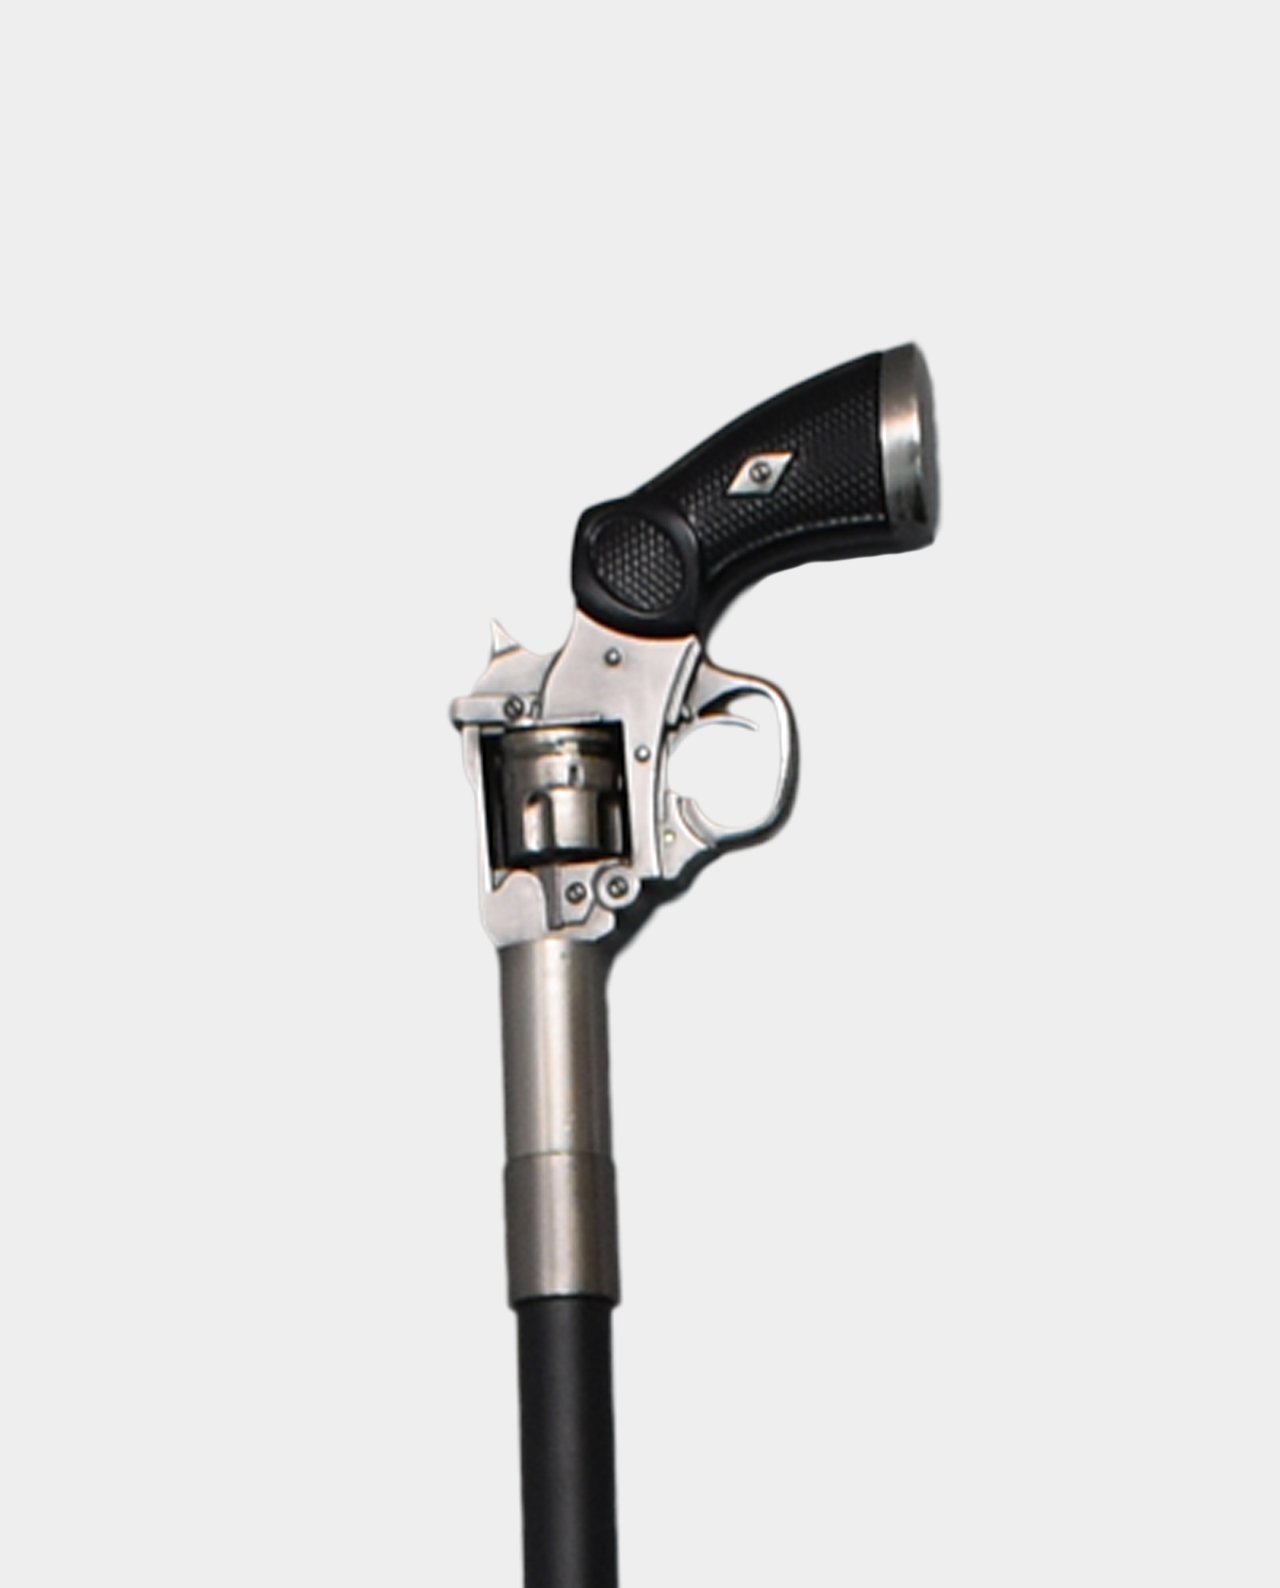 Aluminum Walking Stick Revolver Interesting Gift for Grandfather's Day